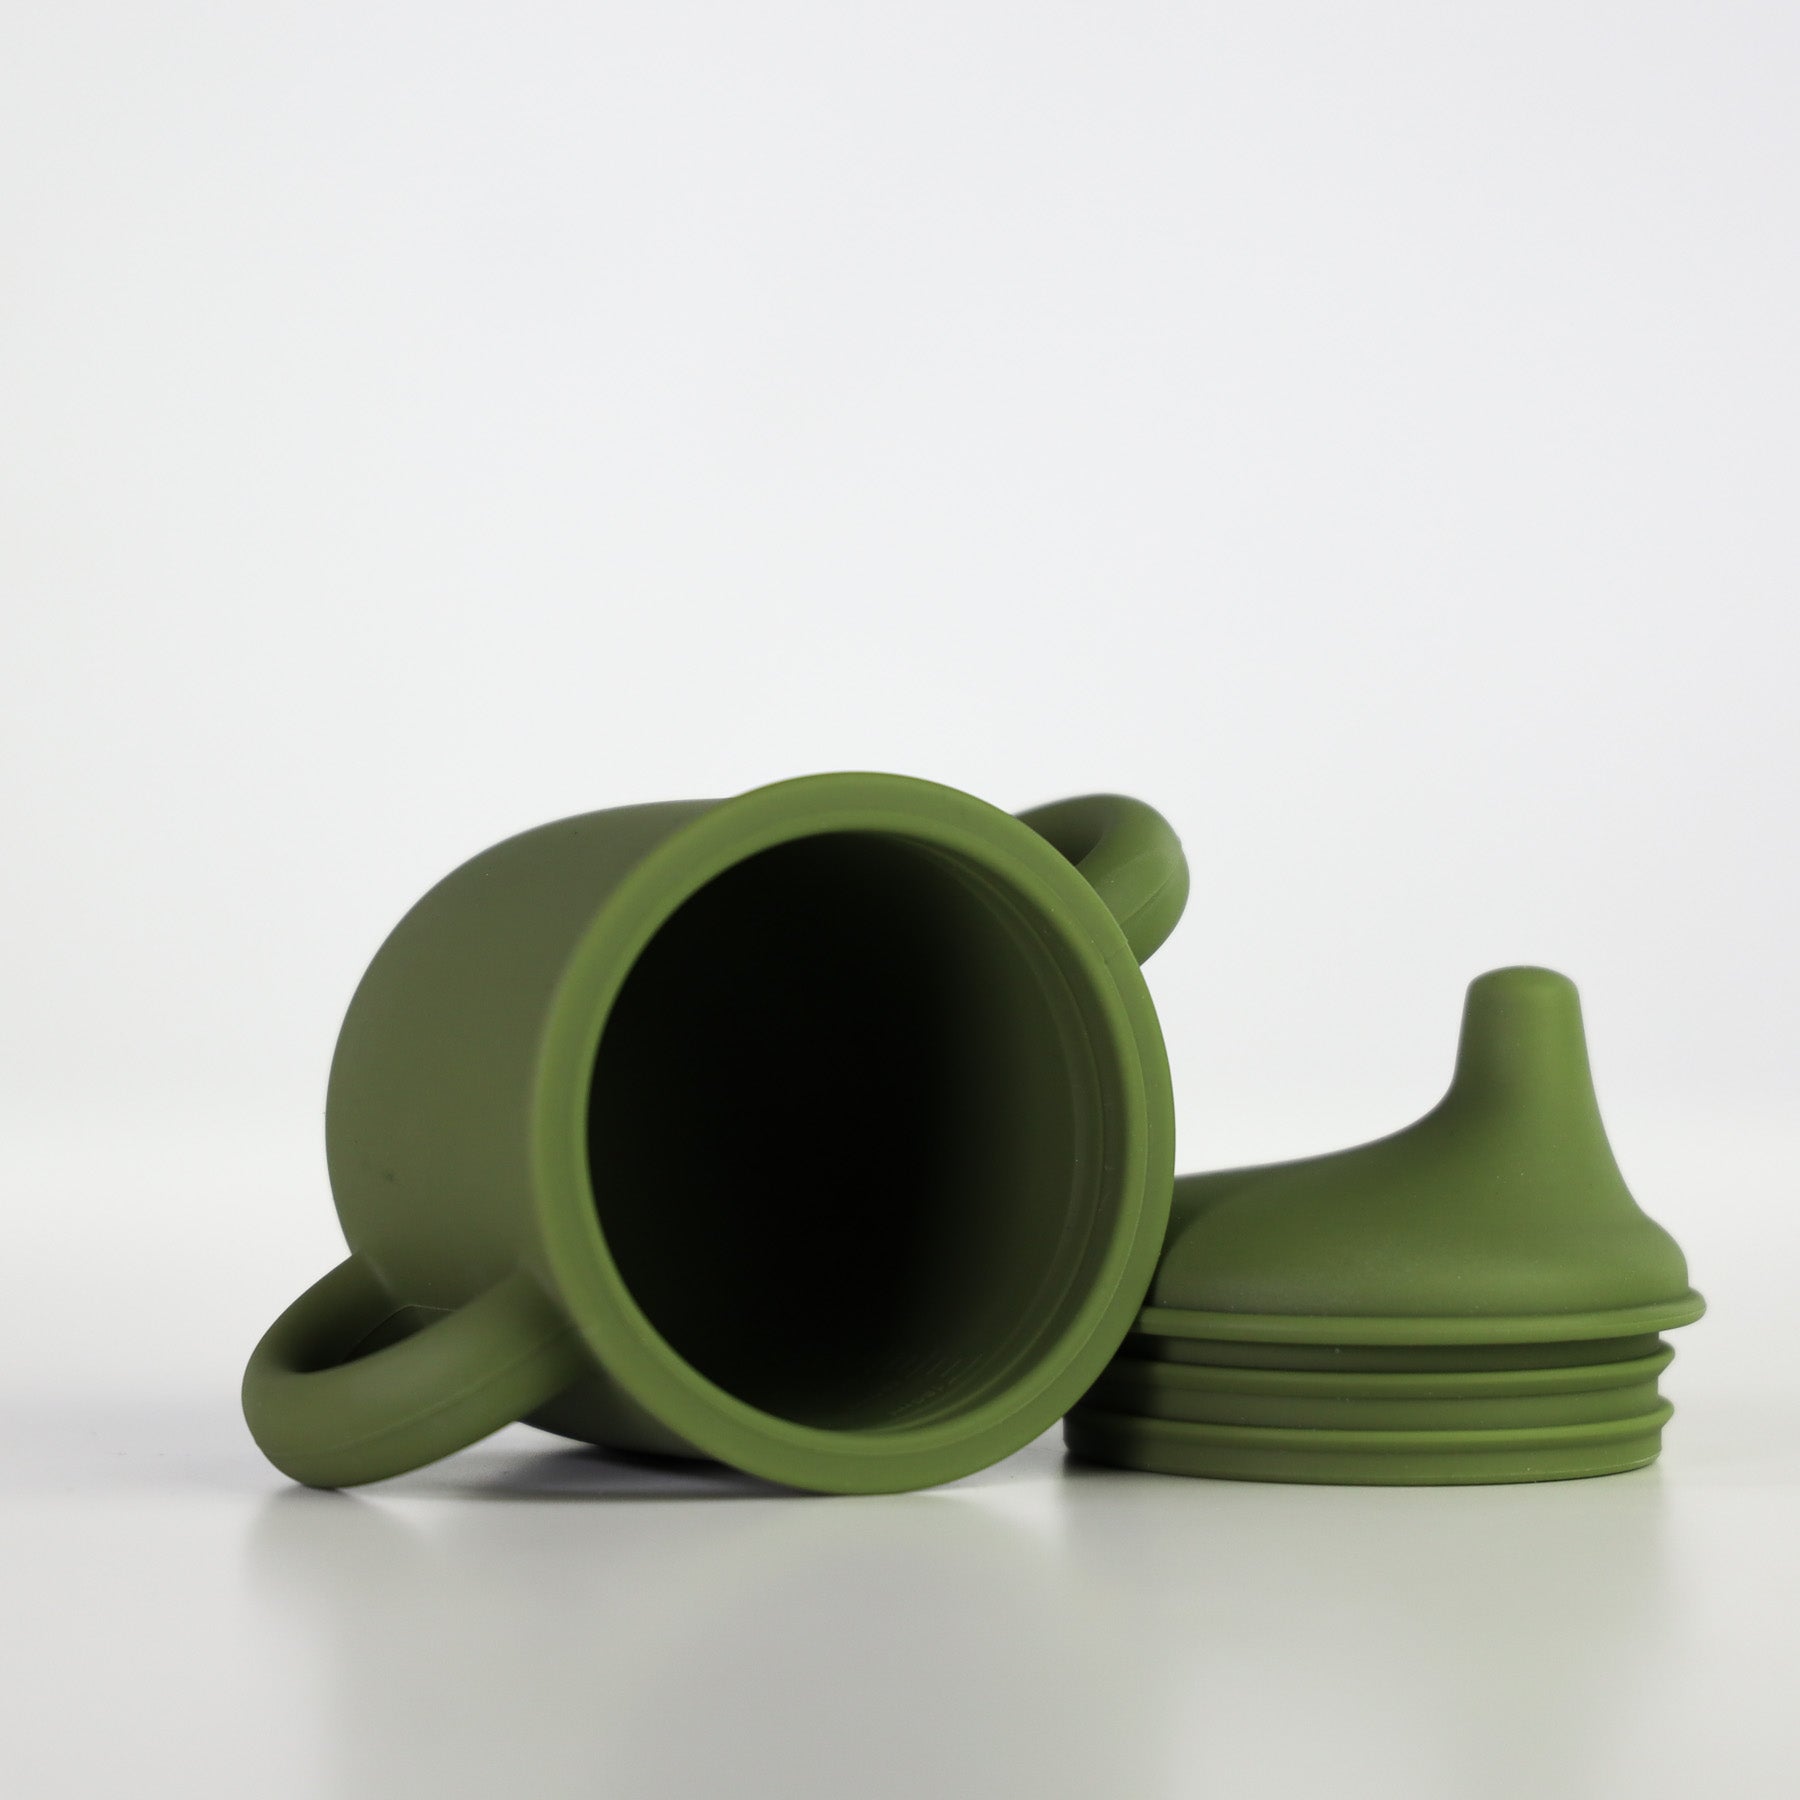 Silicone Sippy Cup with lid and handles Army Green for little boys MKS Miminoo Arizona Unbreakable durable dinnerware for kids